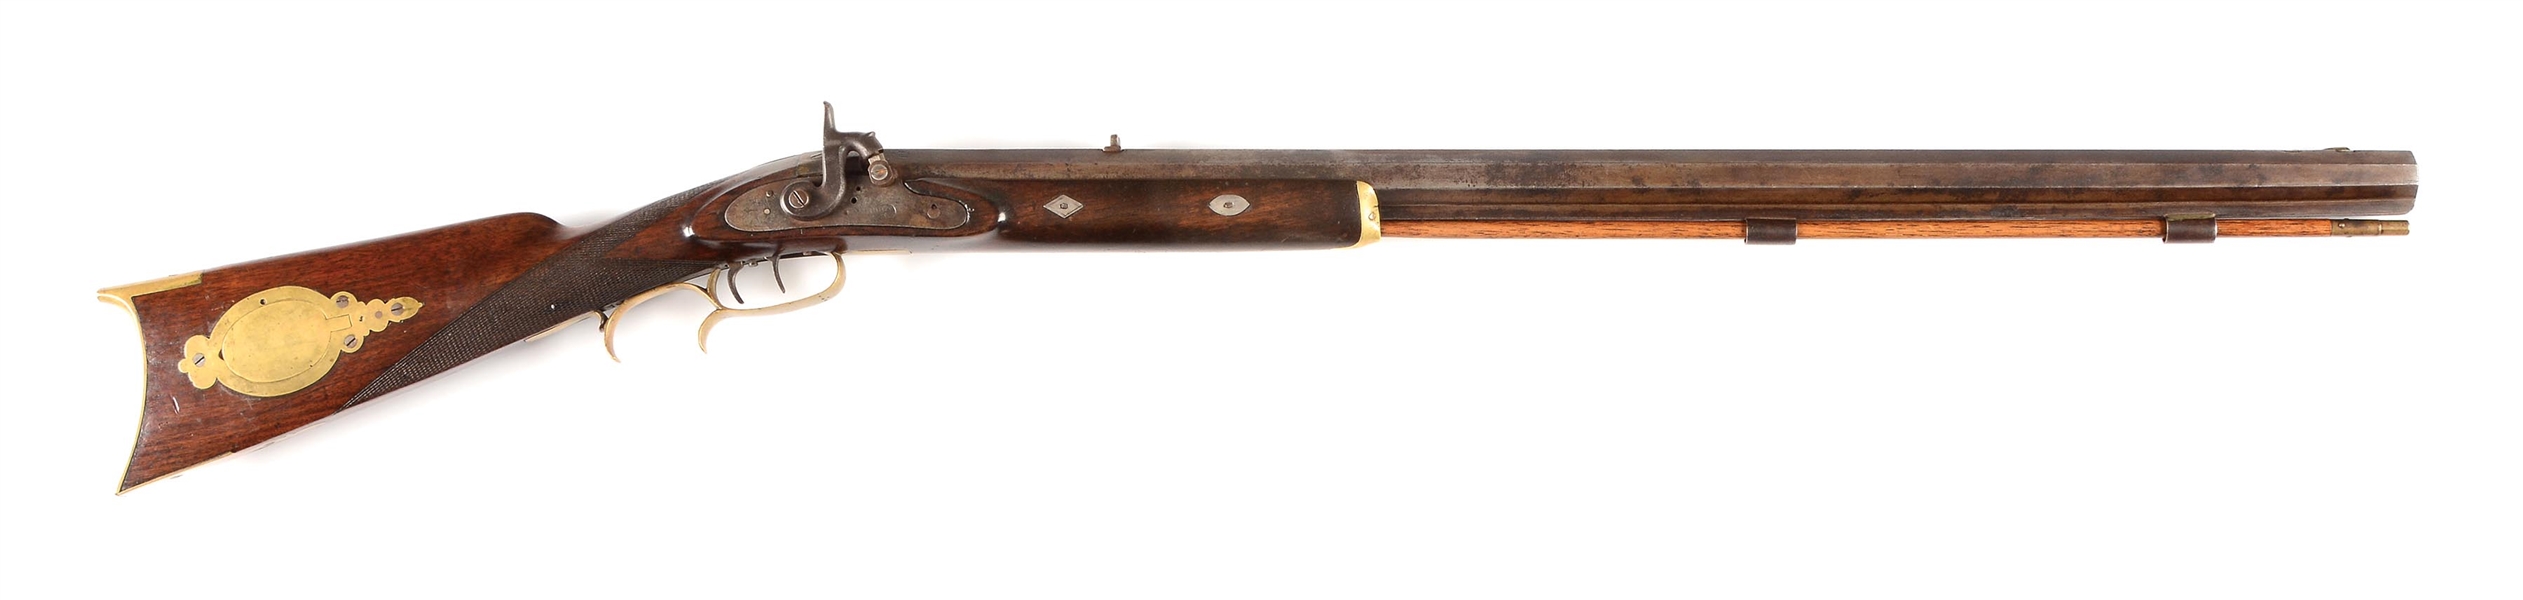 (A) COMPOSITE PLAINS RIFLE WITH RIDDLE LOCK AND BARREL MARKED "S. HAWKEN".